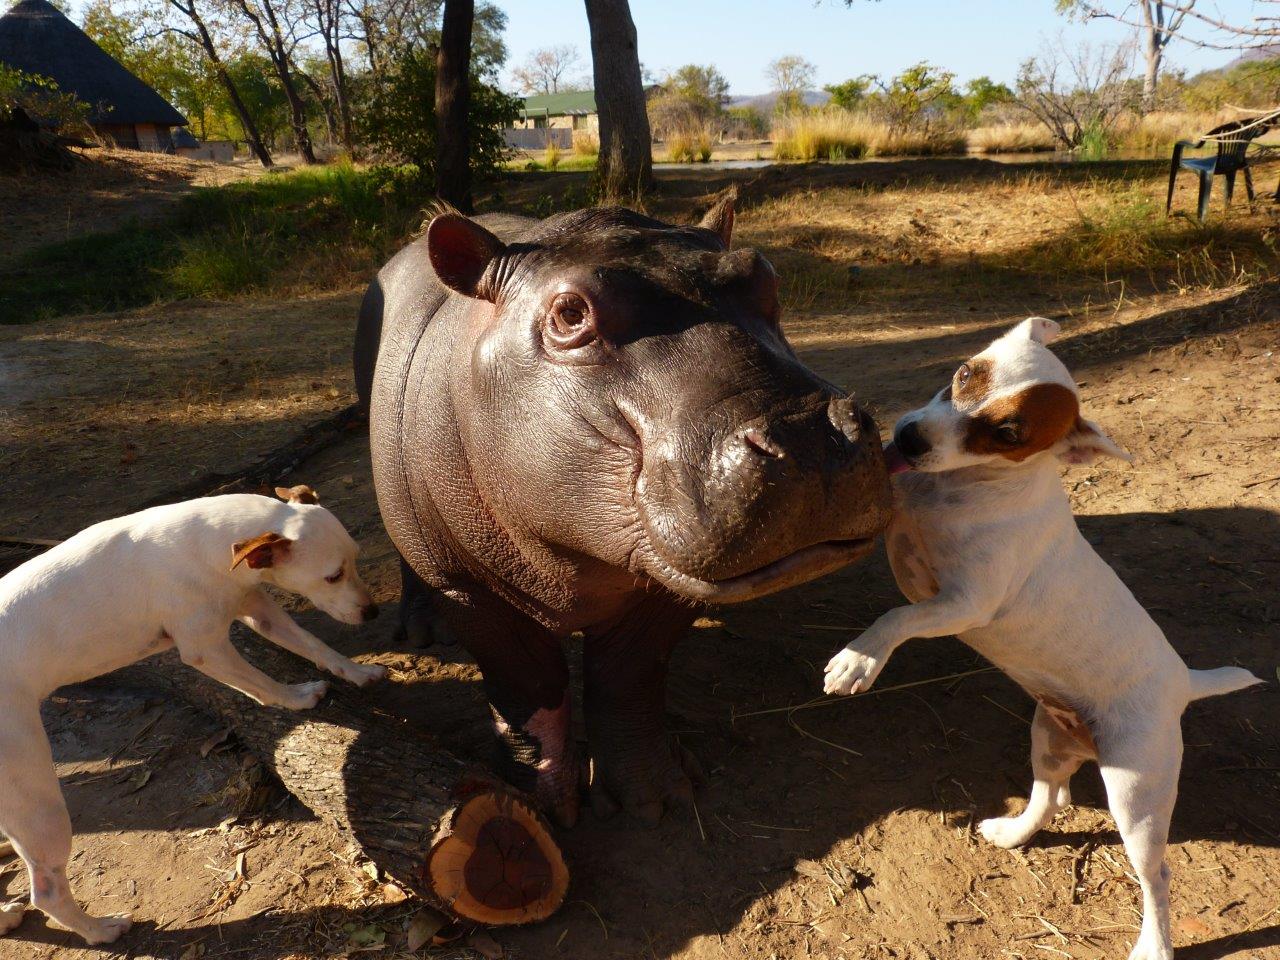 Orphaned Baby Hippo Douglas Leaves Canine Friends To Return To The Wild